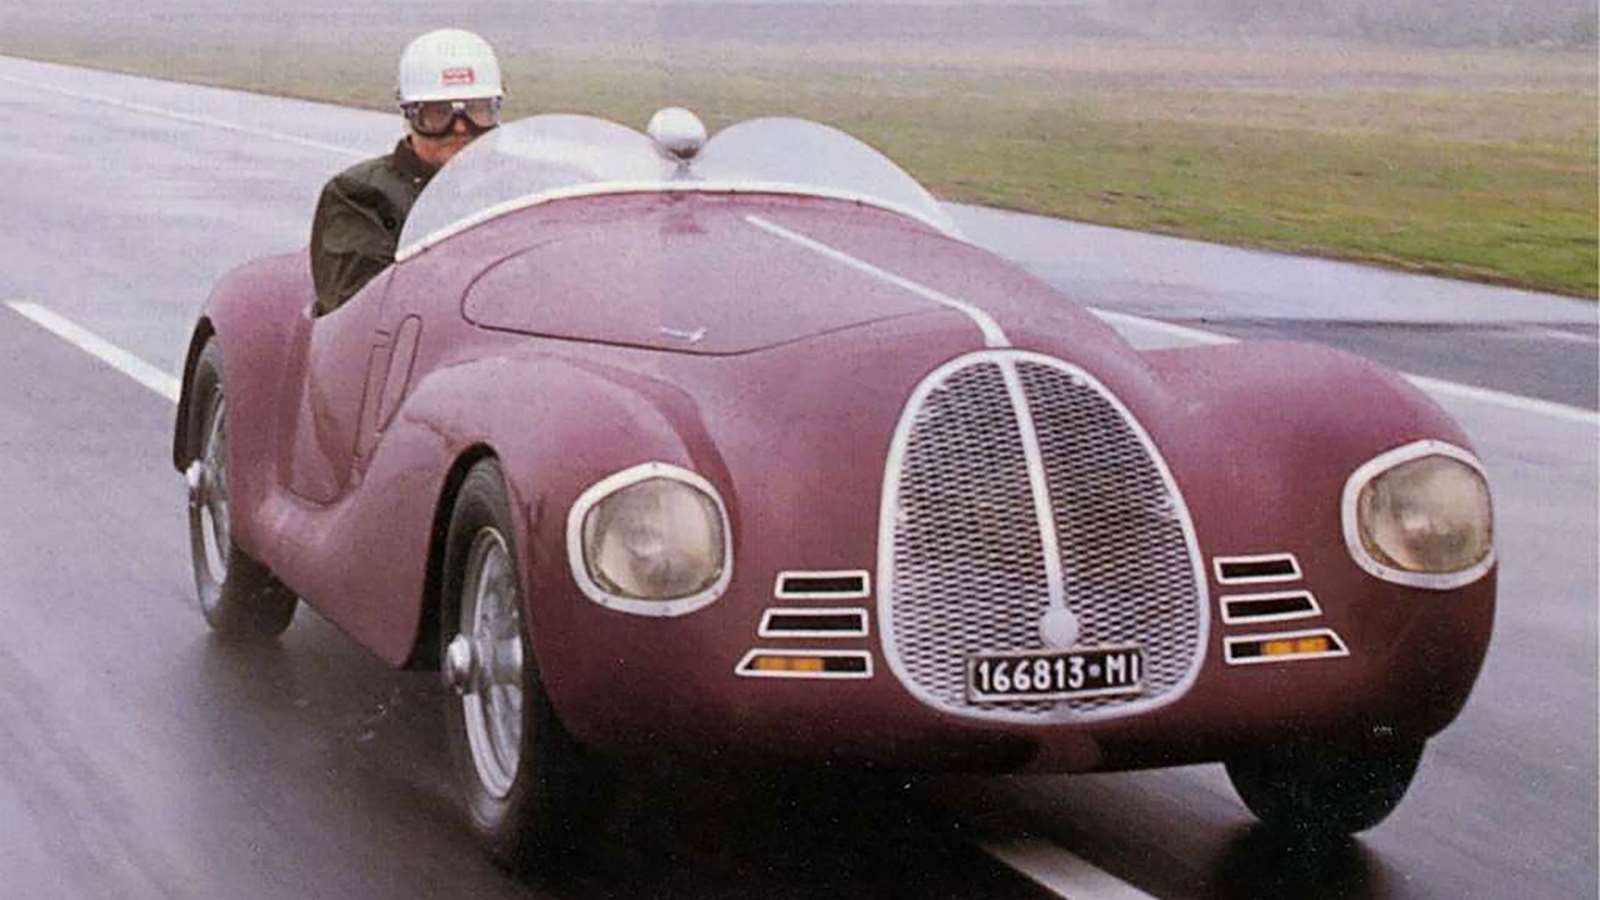 The AAC 815 was Enzo Ferrari's first car - Thank Frankel it's Friday | GRR